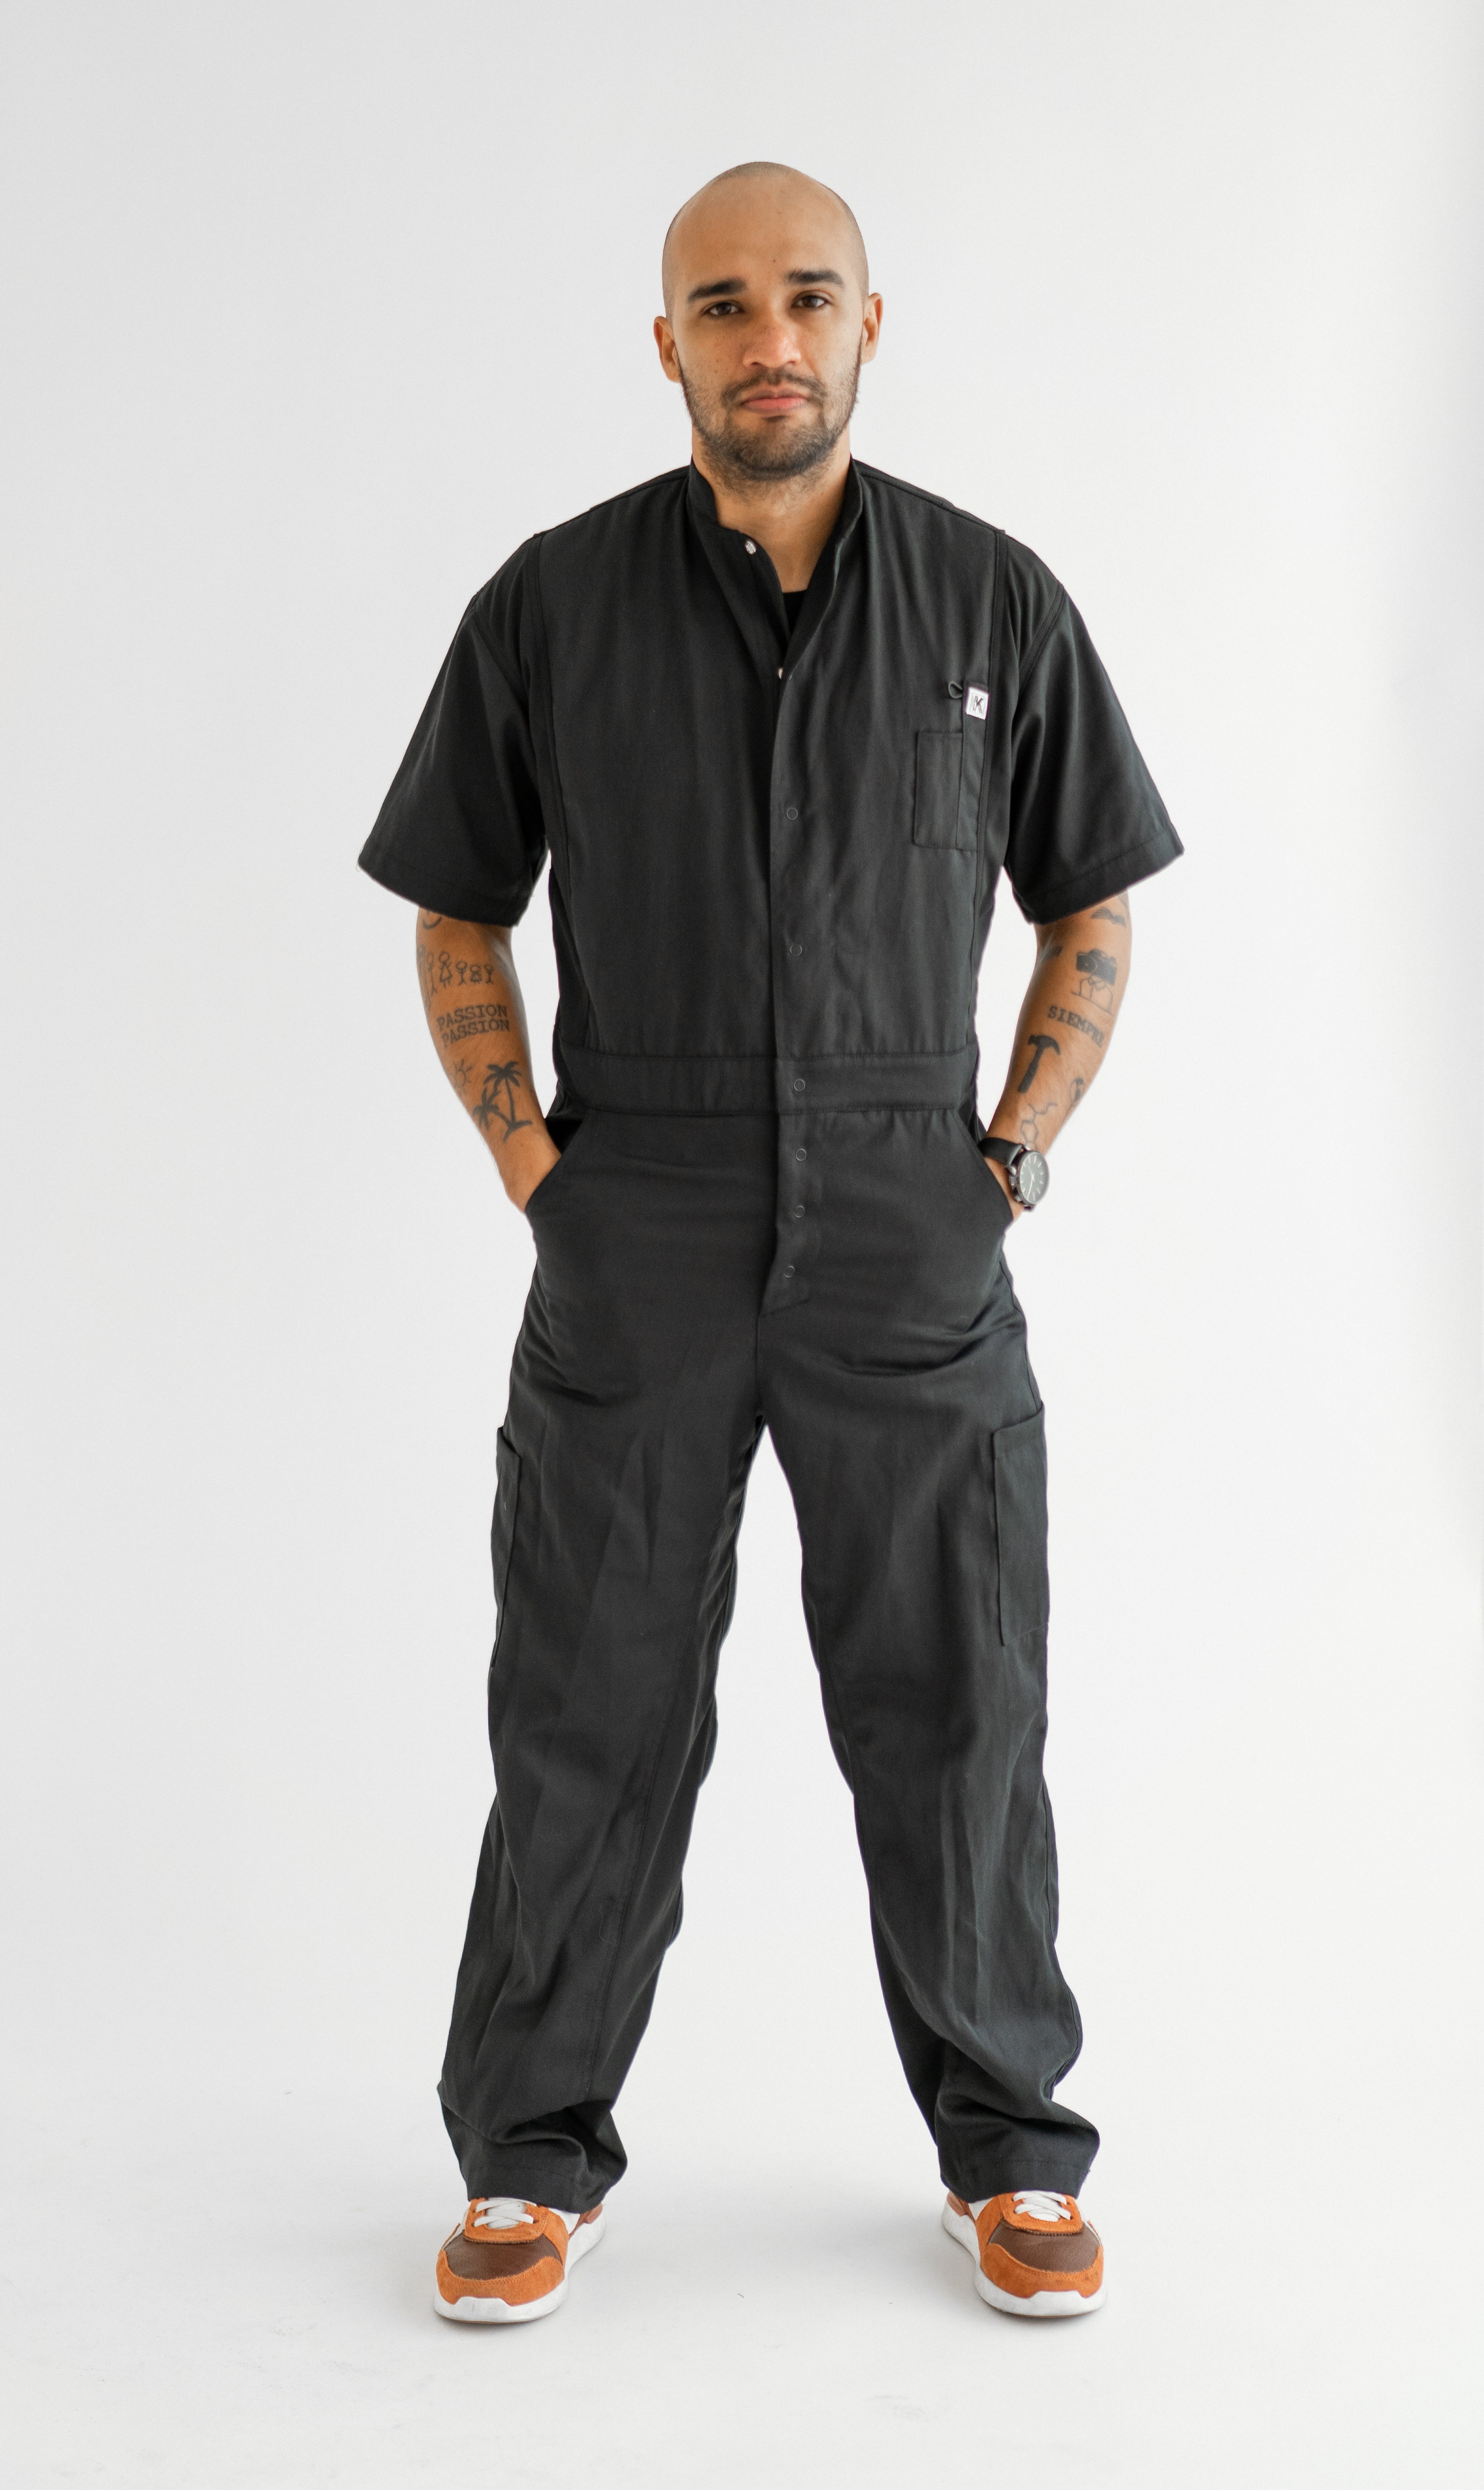 Mens Chef Jumpsuit | ChefKGear – ChefKGear.com